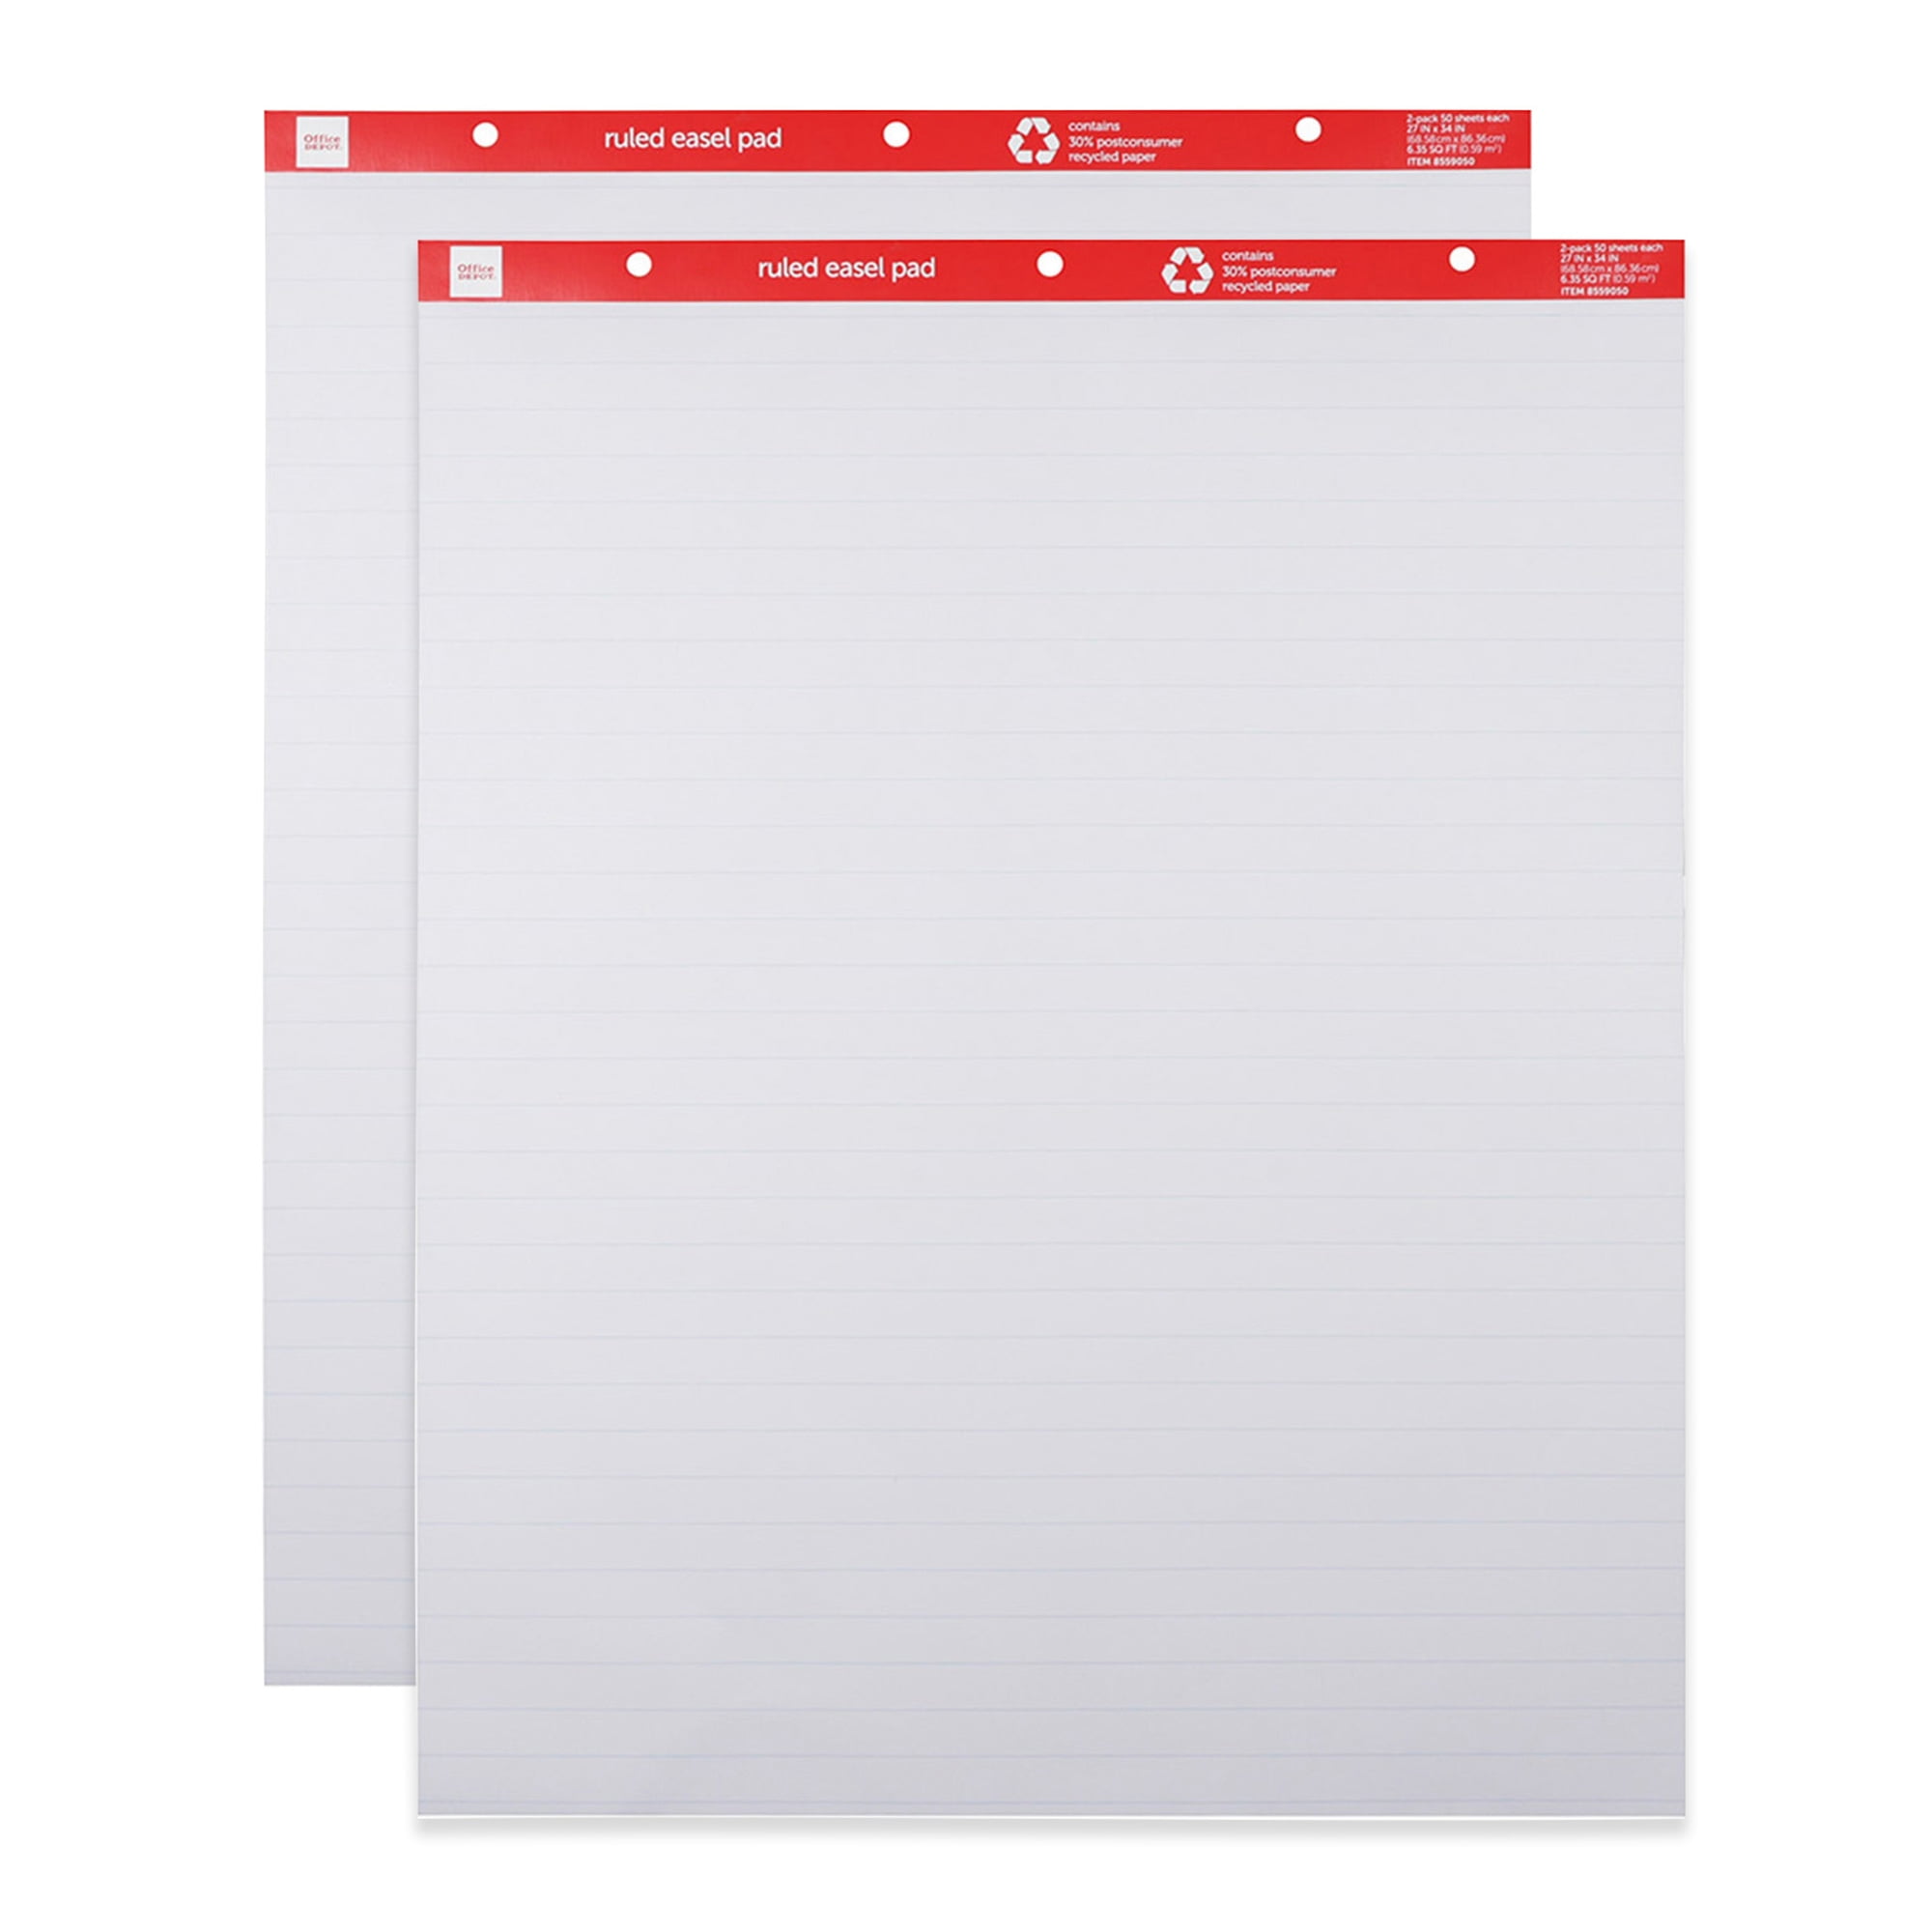 Staples Stickies Easel Pads 25 x 30 White 30 Sheets/Pad 2 Pads